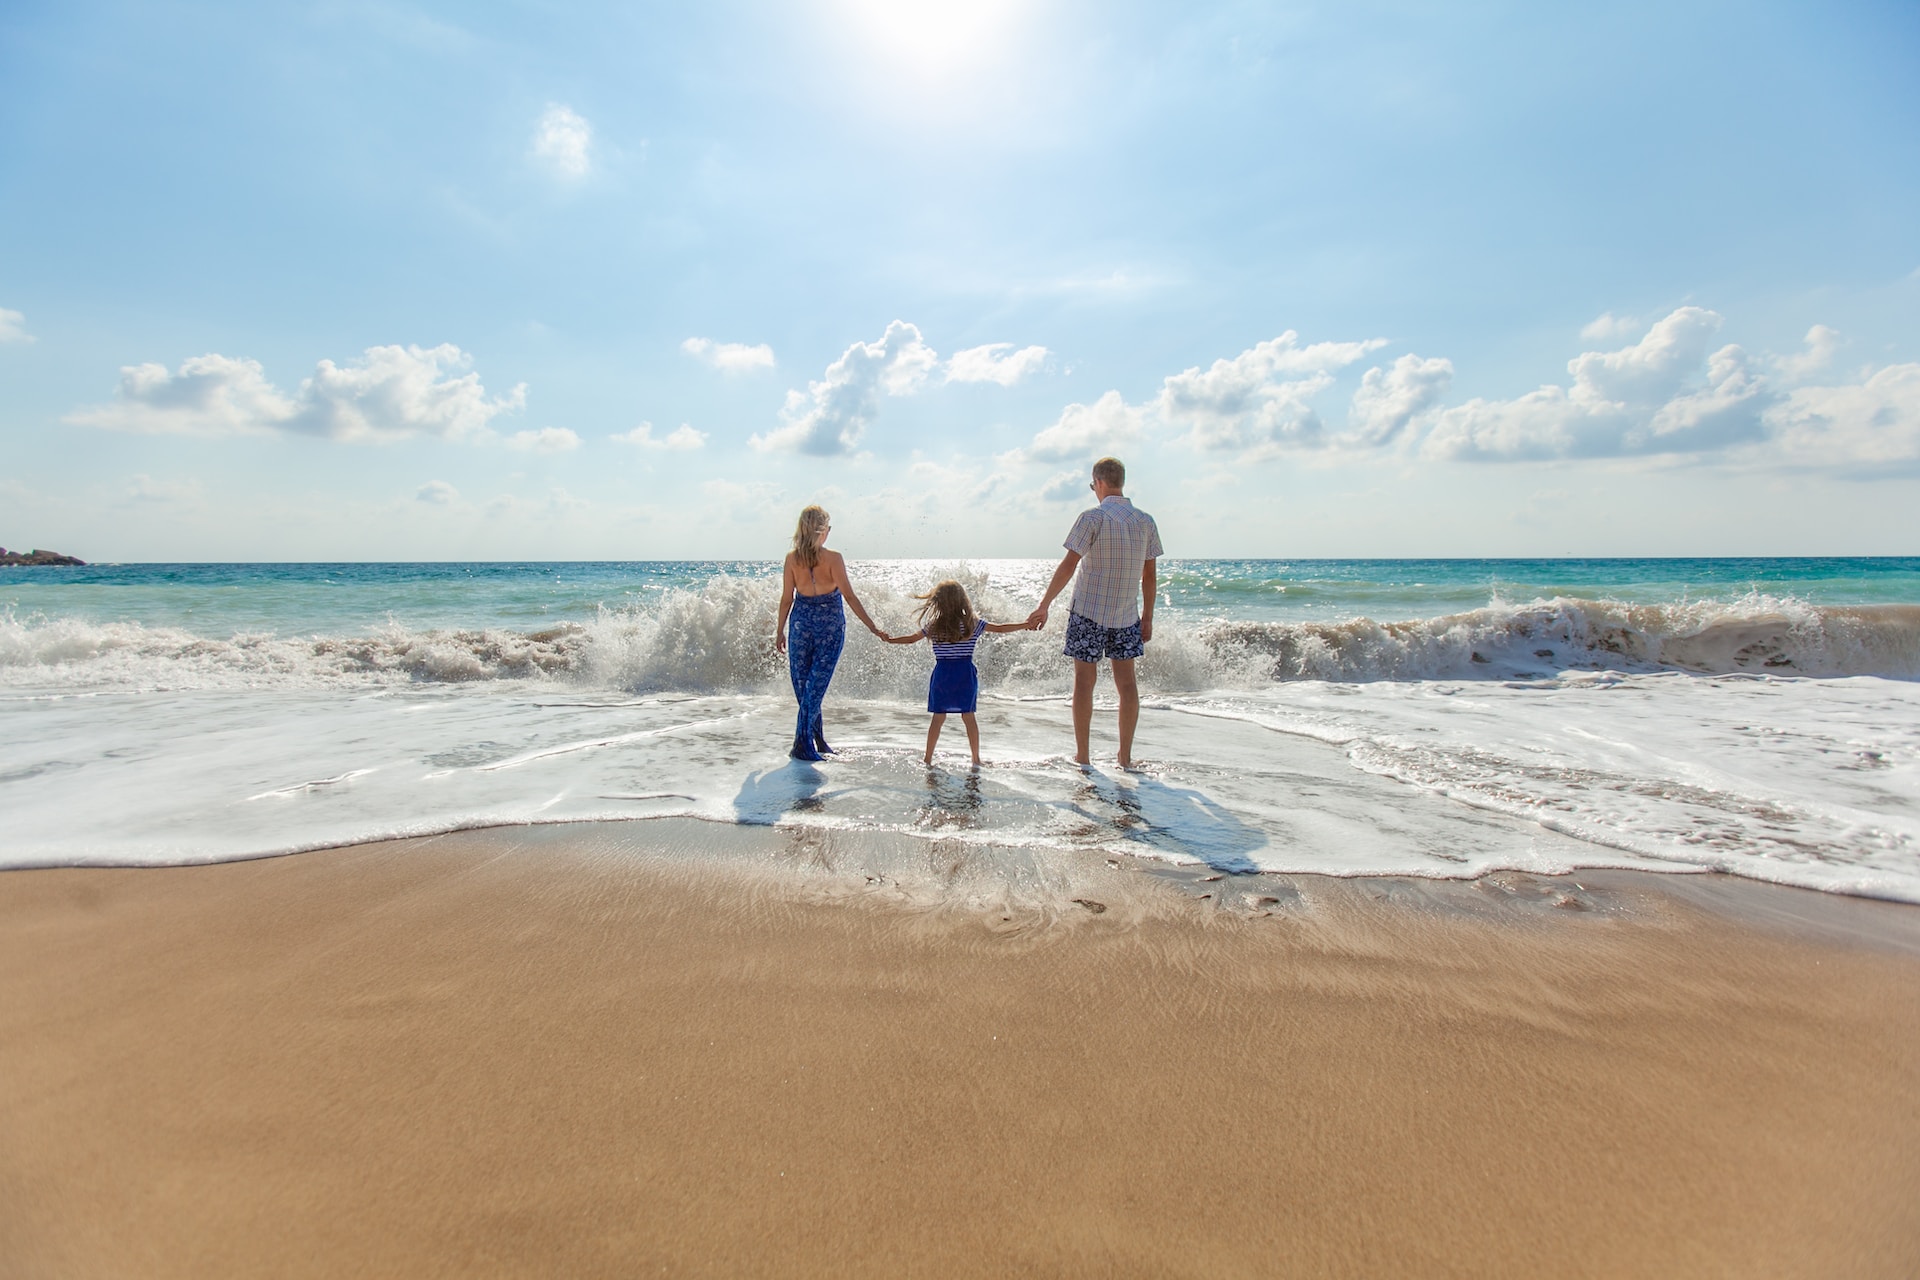 How to Plan a Perfect Beach Day with Your Family